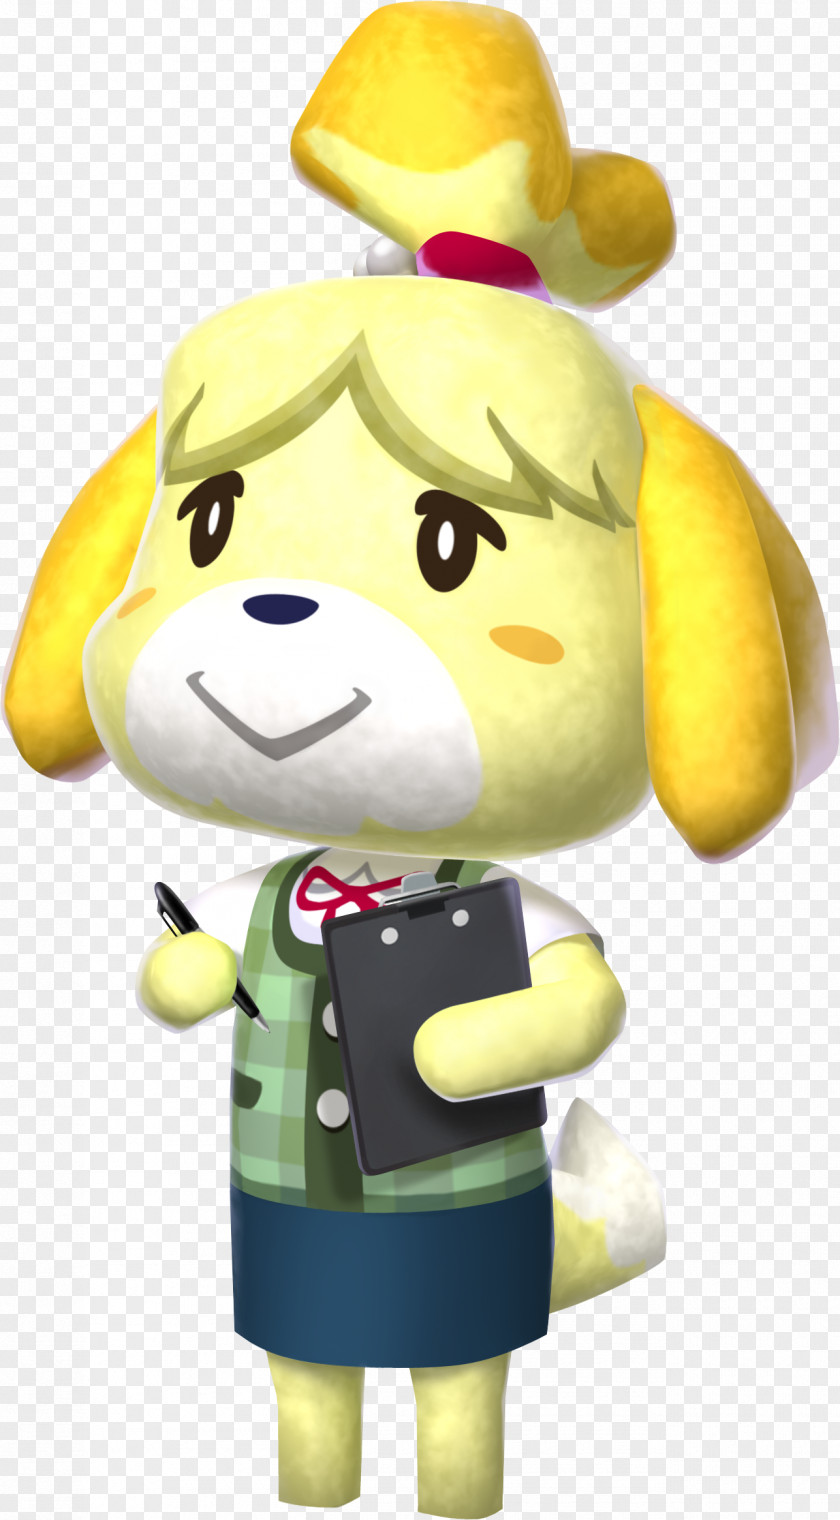 New Leaf Cliparts Animal Crossing: Amiibo Festival Super Smash Bros. For Nintendo 3DS And Wii U Minecraft PNG